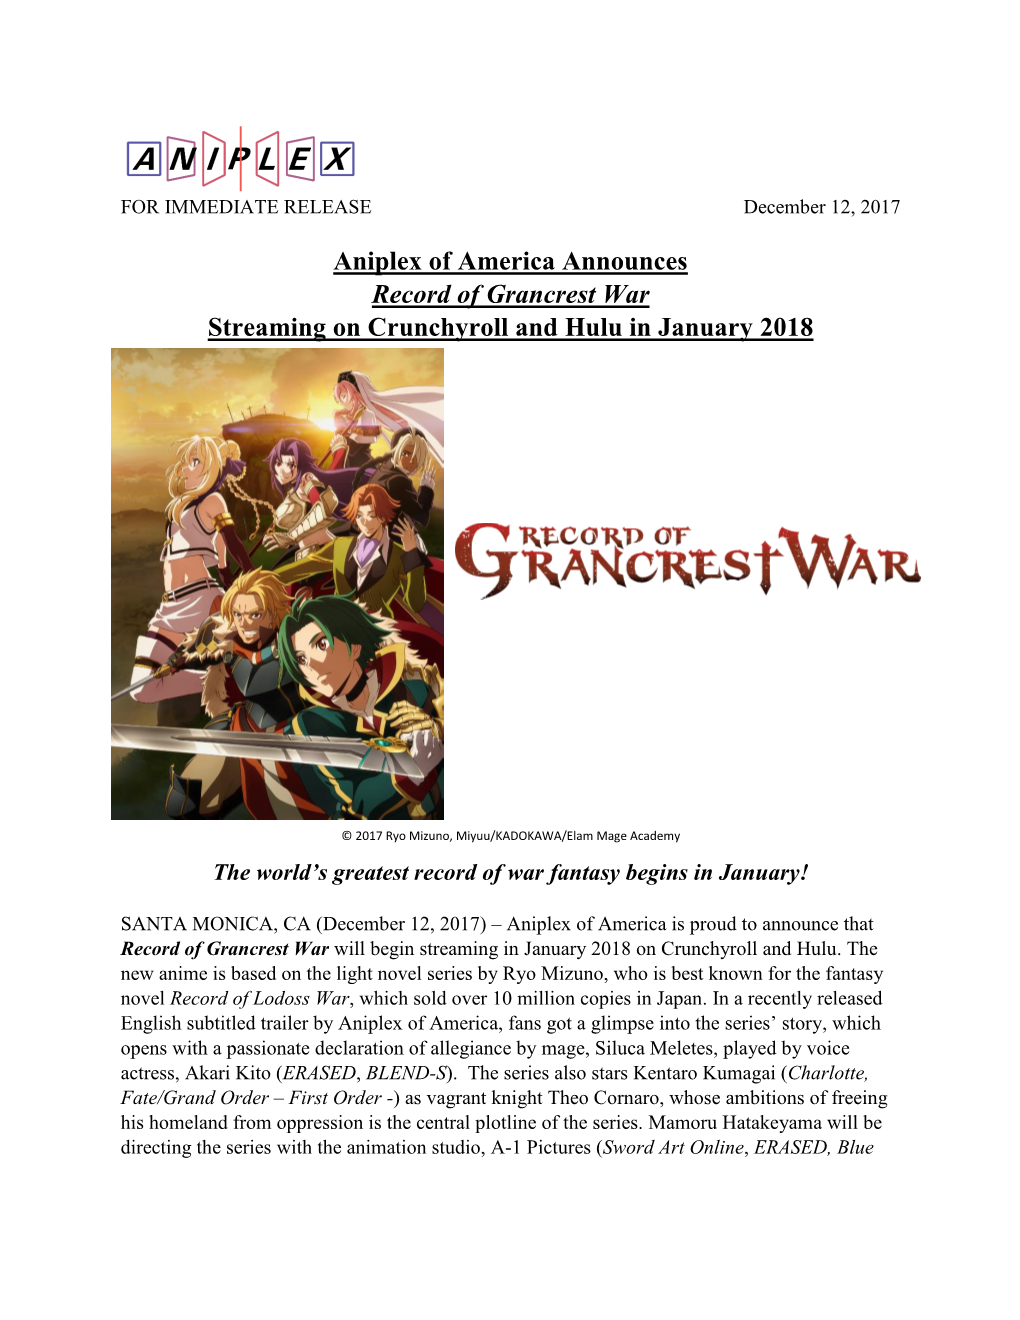 Aniplex of America Announces Record of Grancrest War Streaming on Crunchyroll and Hulu in January 2018